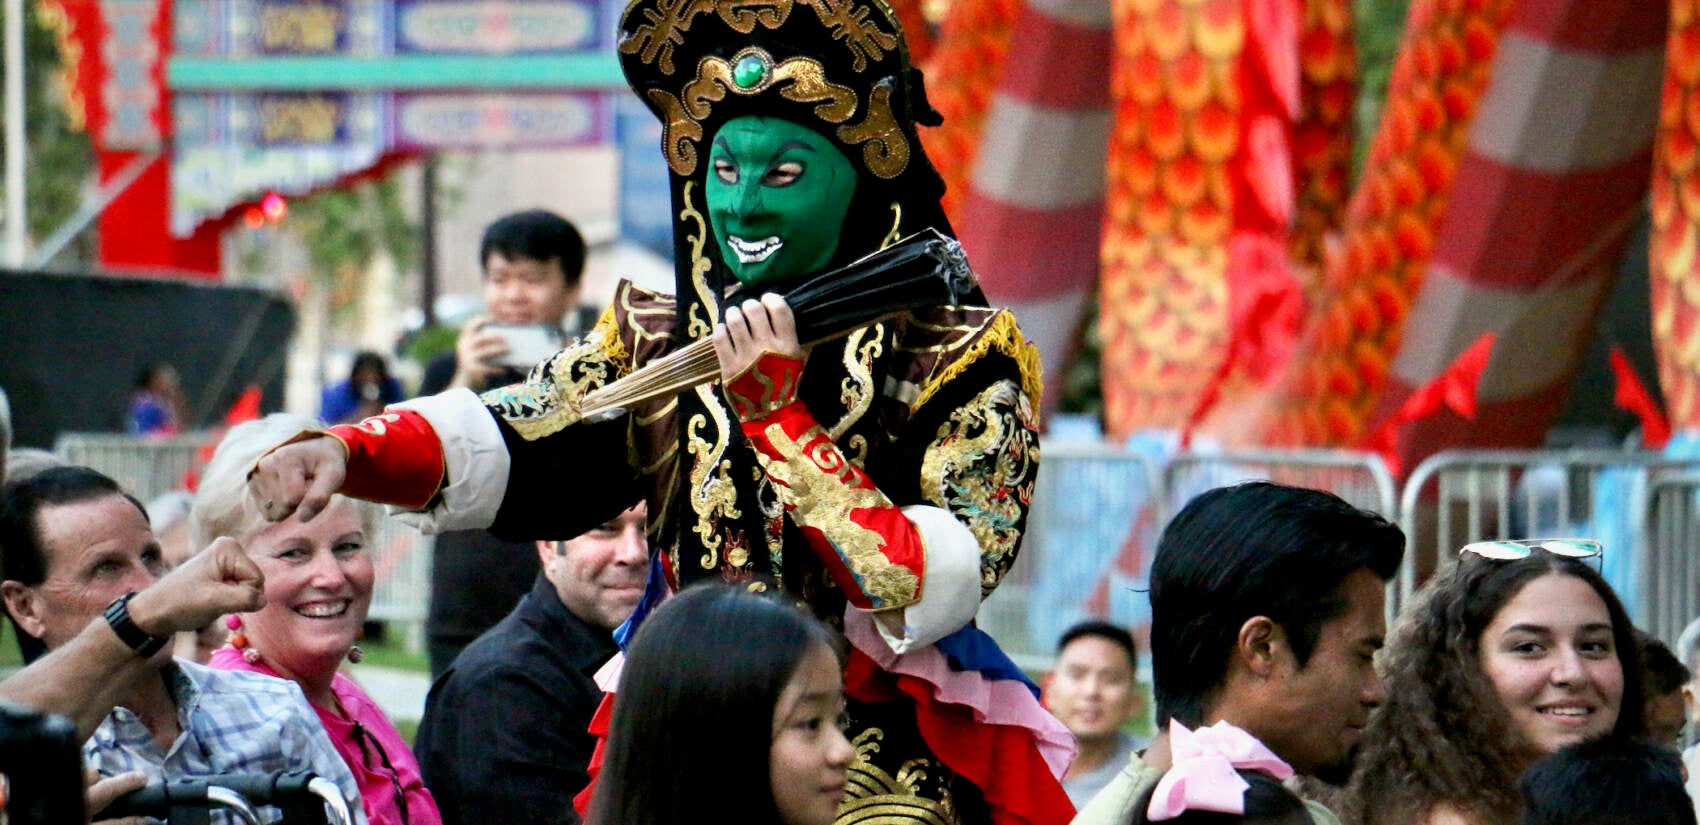 A face-changing performer mingles with the crowd during a performance at the Chinese Lantern Festival